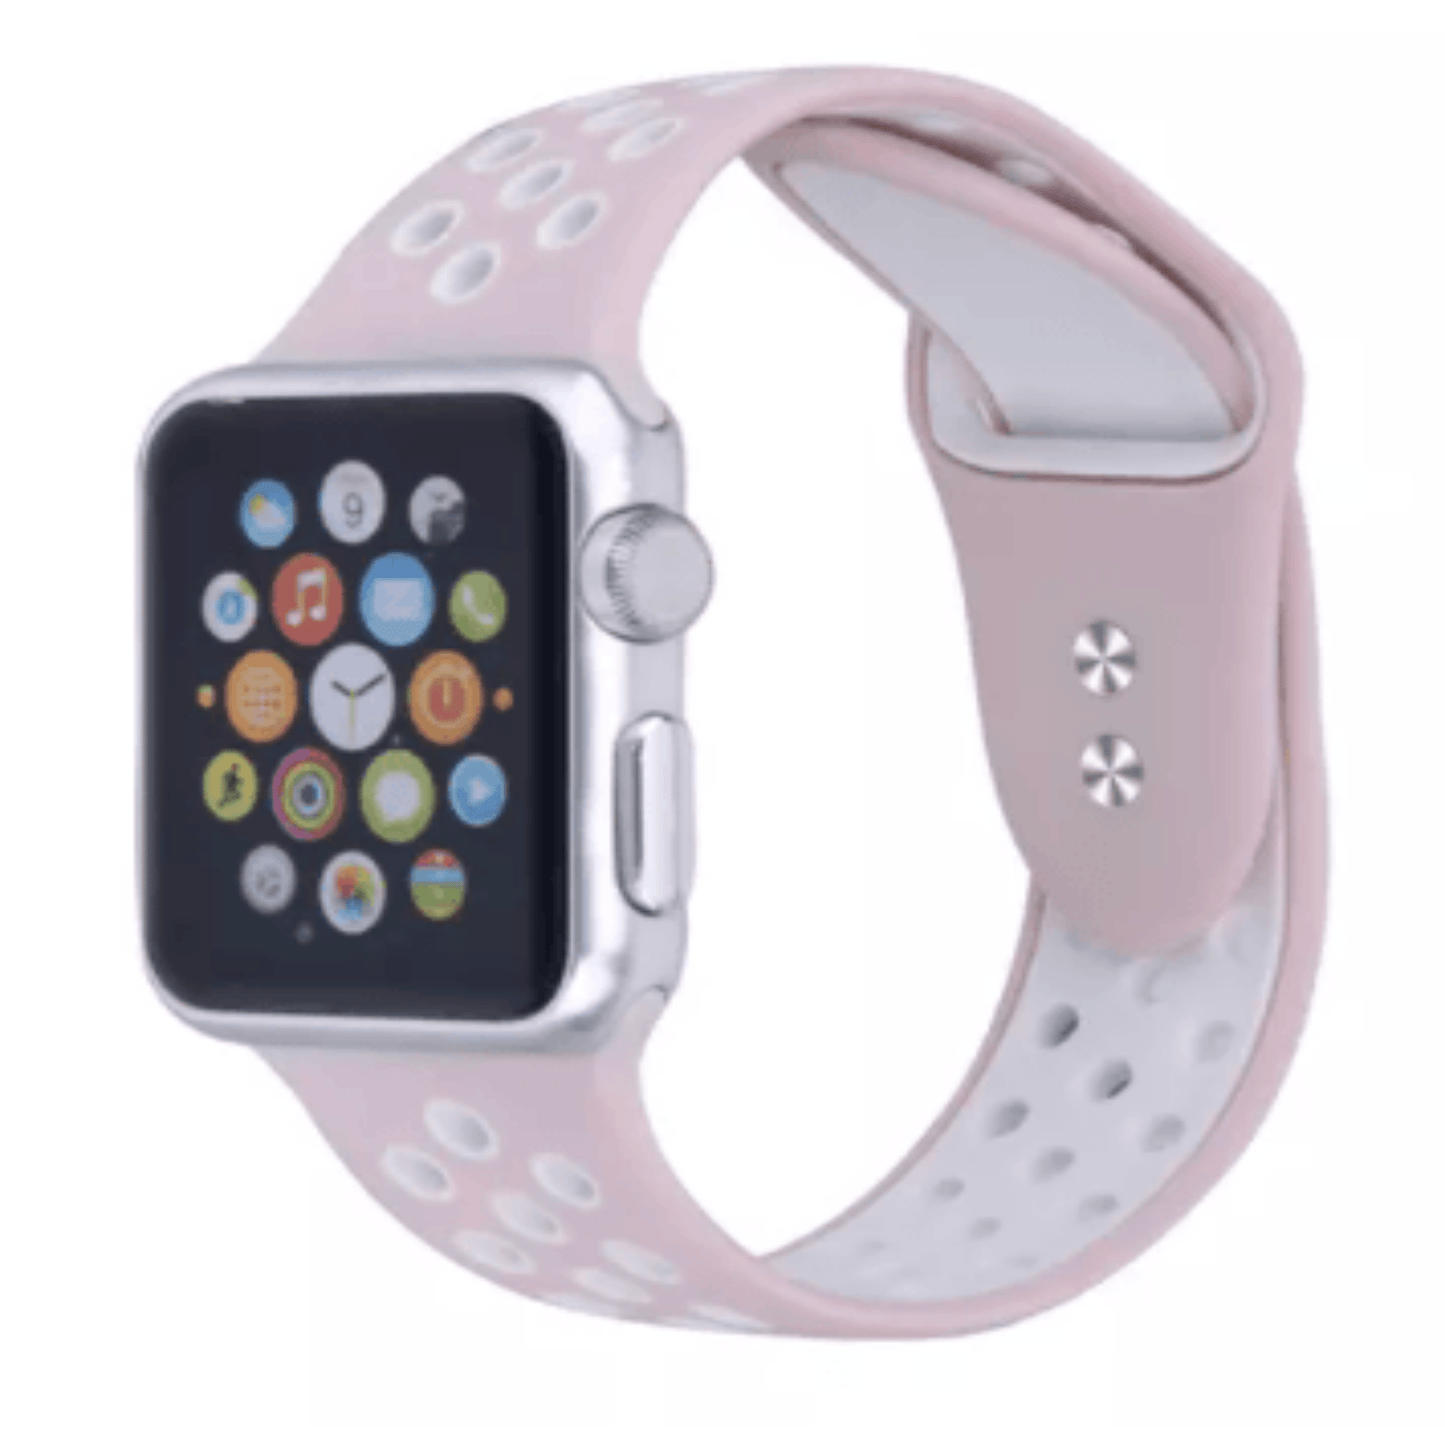 Breathable Silicone Sport Replacement Band for Apple Watch Light Pink White Apple Watch Band Elements Watches